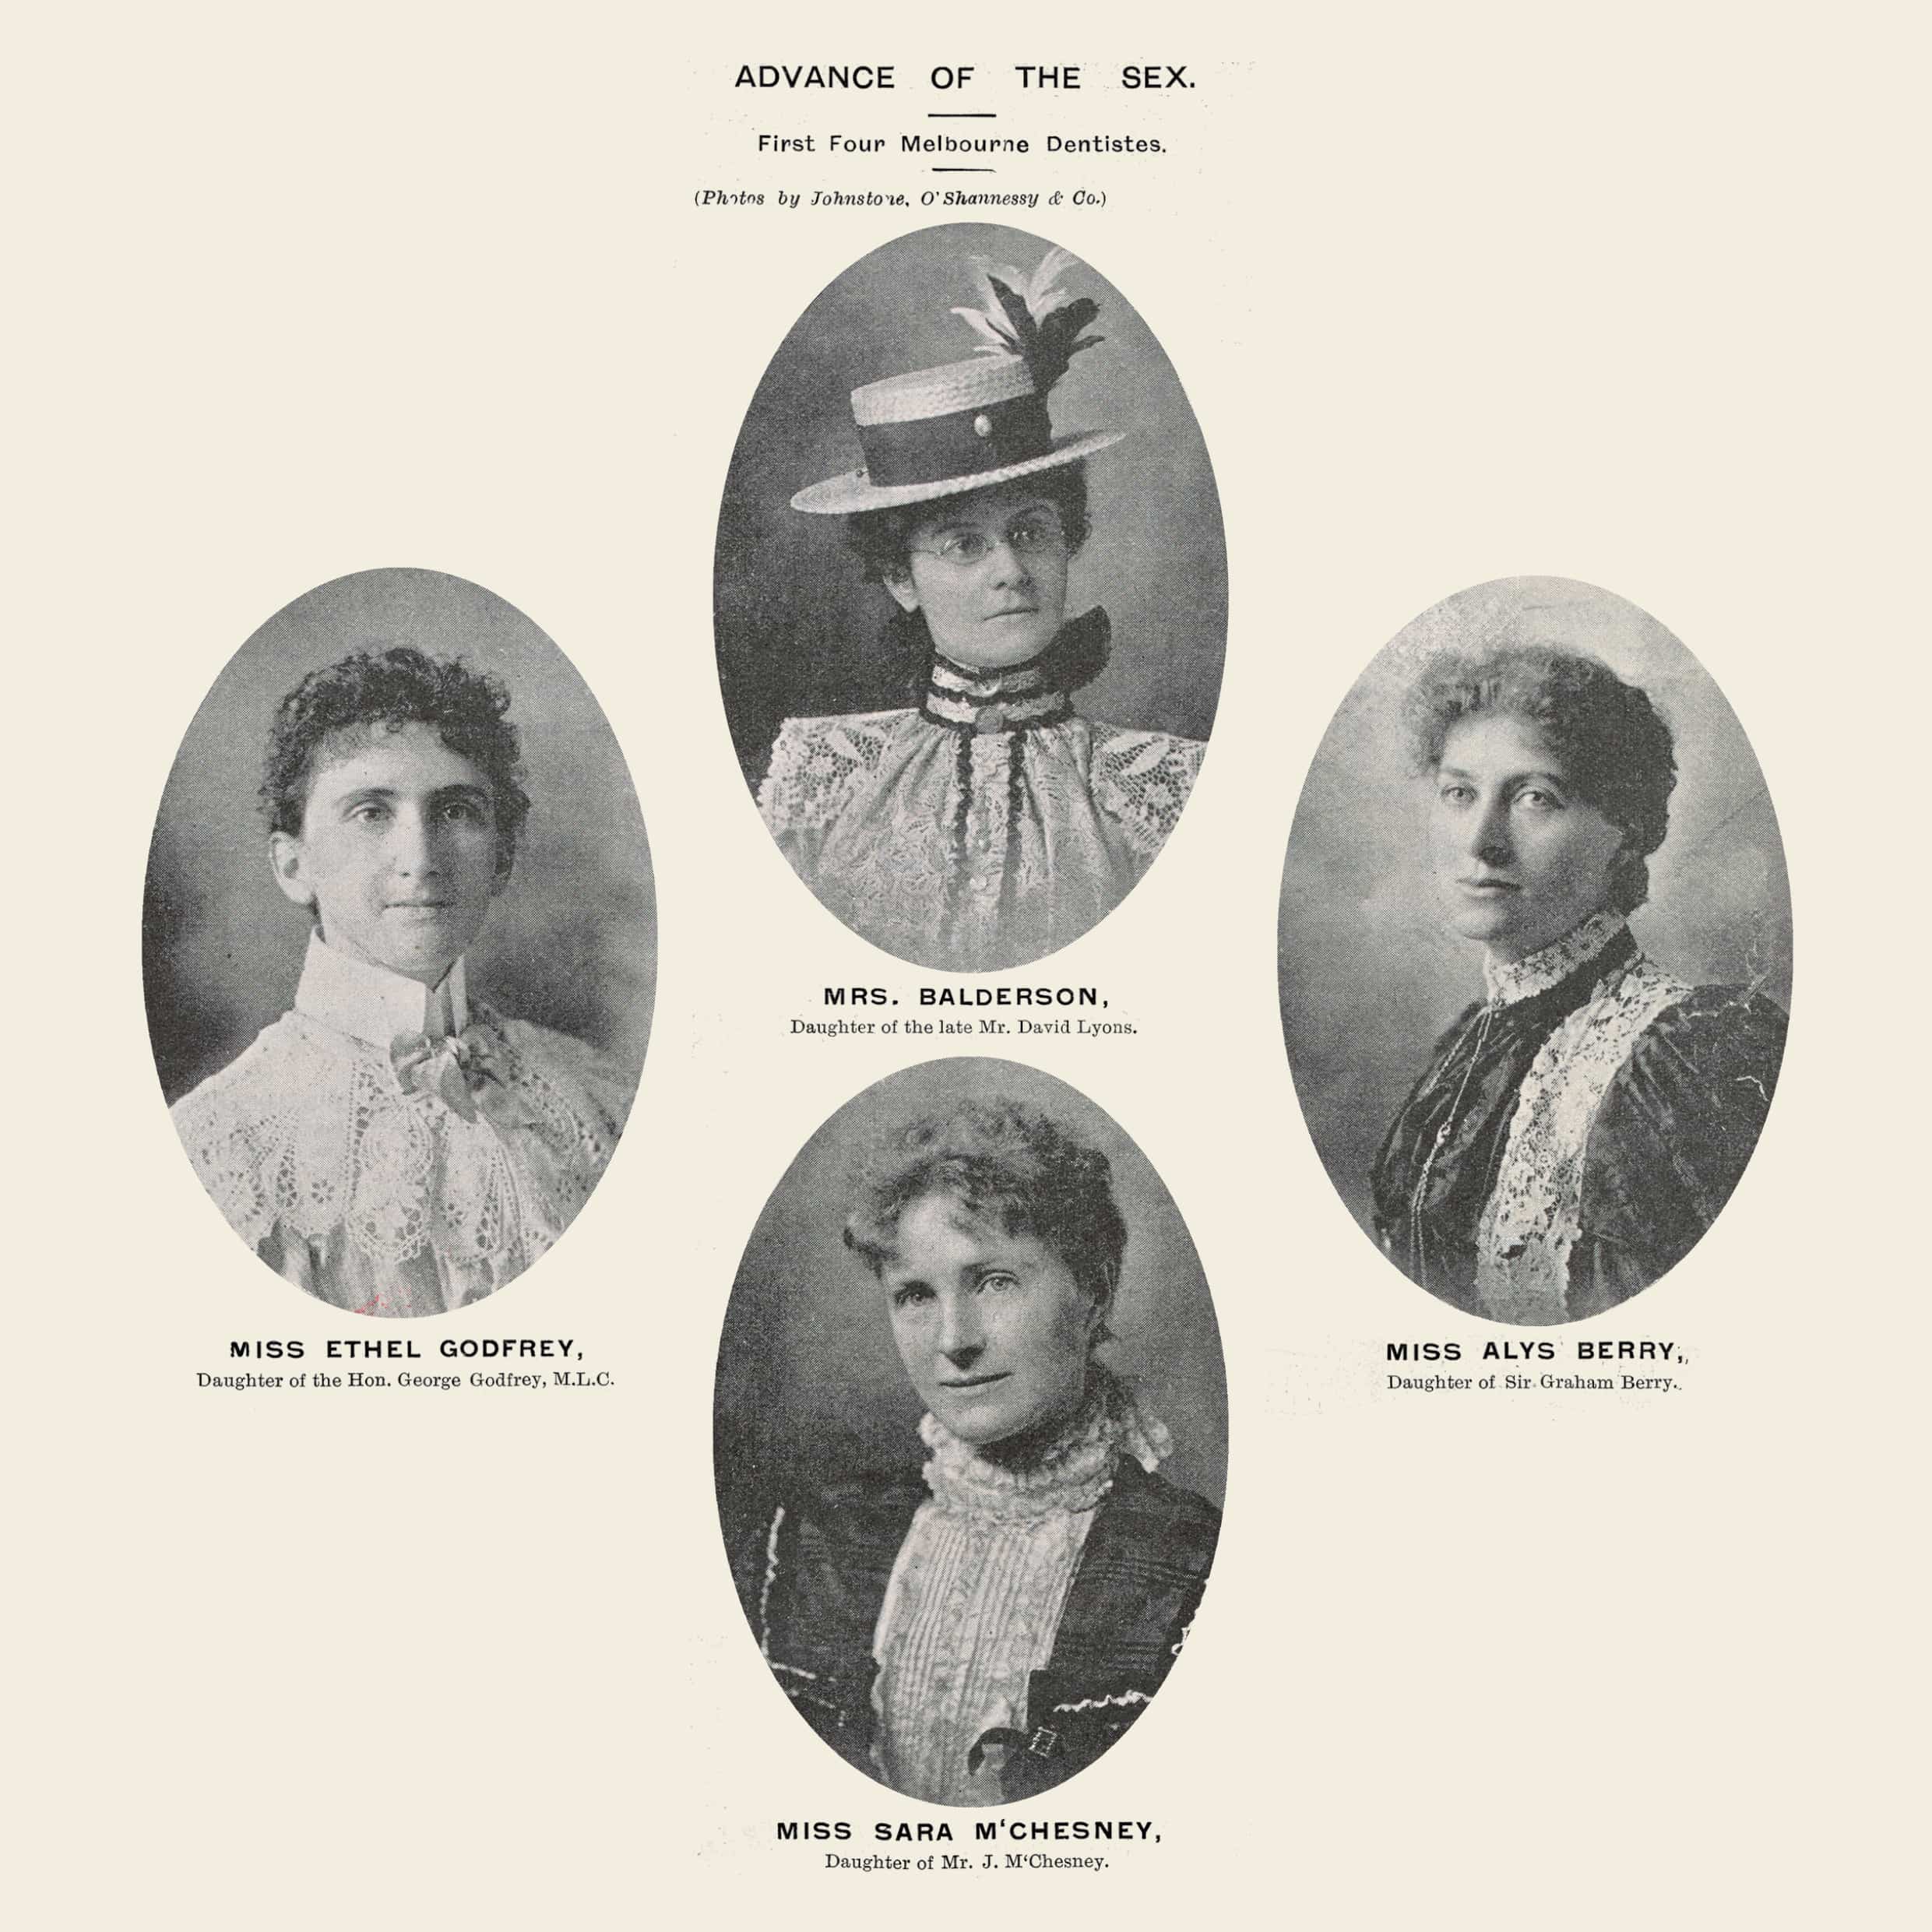 ‘Advance of the sex: First four Melbourne dentistes’, Melbourne Punch, 9 February 1899, photographs by Johnstone, O’Shannessy & Co.: Miss Ethel Godfrey, Mrs Balderson, Miss Alys Berry and Miss Sara McChesney. State Library Victoria 